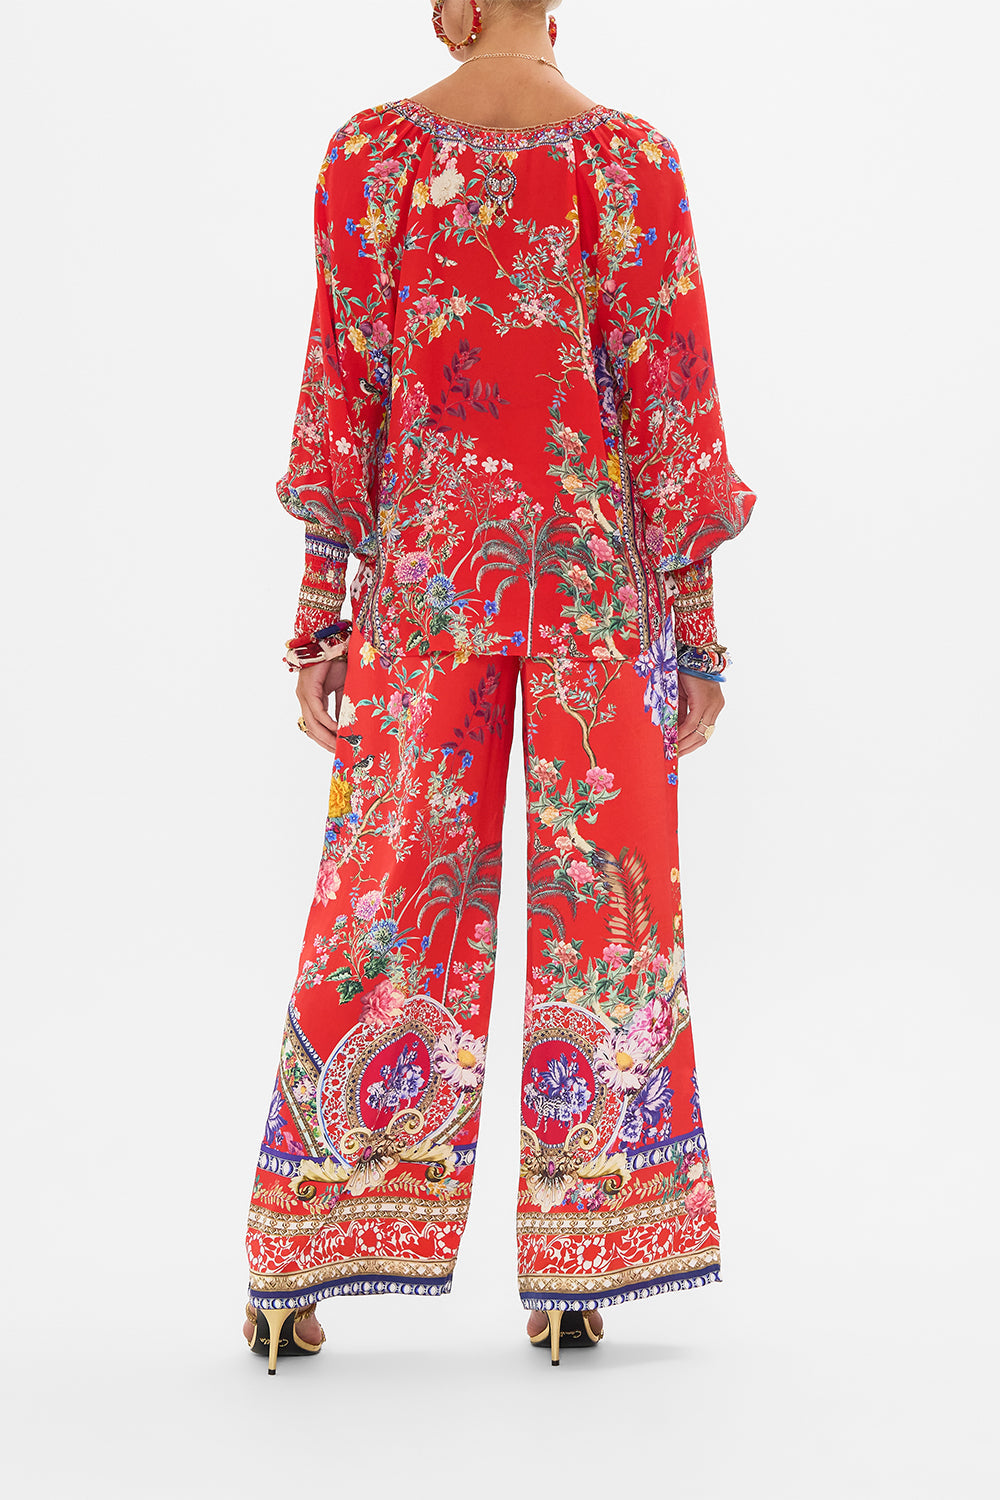 CAMILLA floral print silk blouse in The Summer Palace print